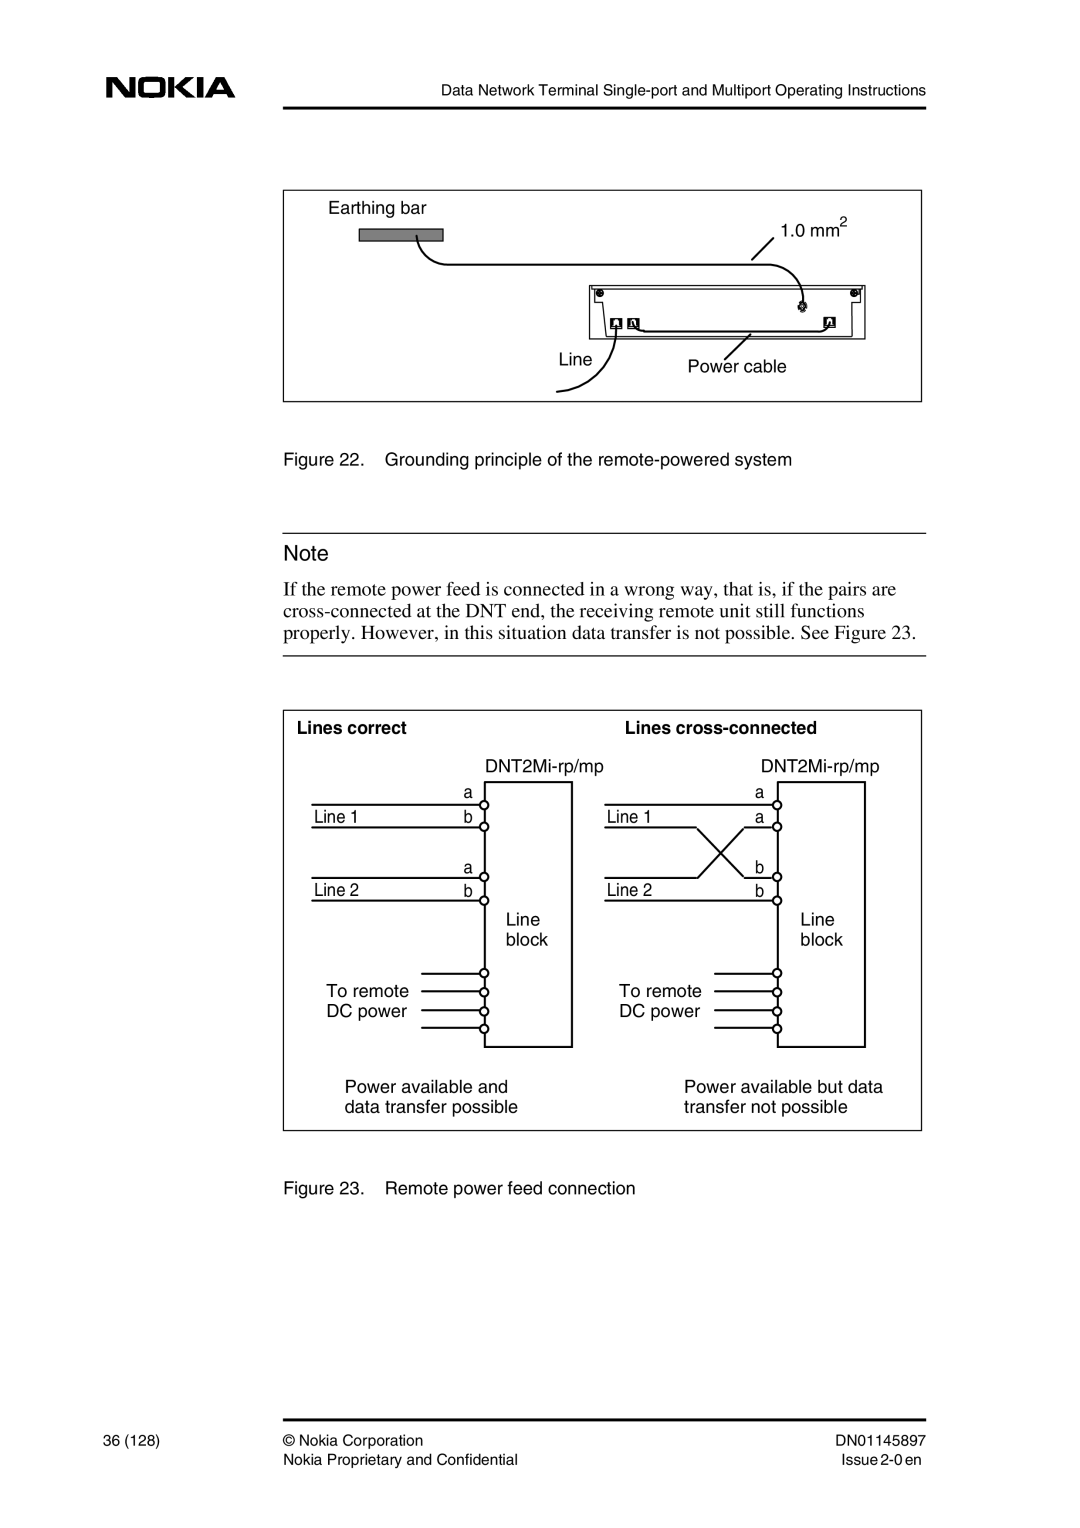 Nokia DNT2Mi sp/mp user manual Lines cross-connected, Lines correct 